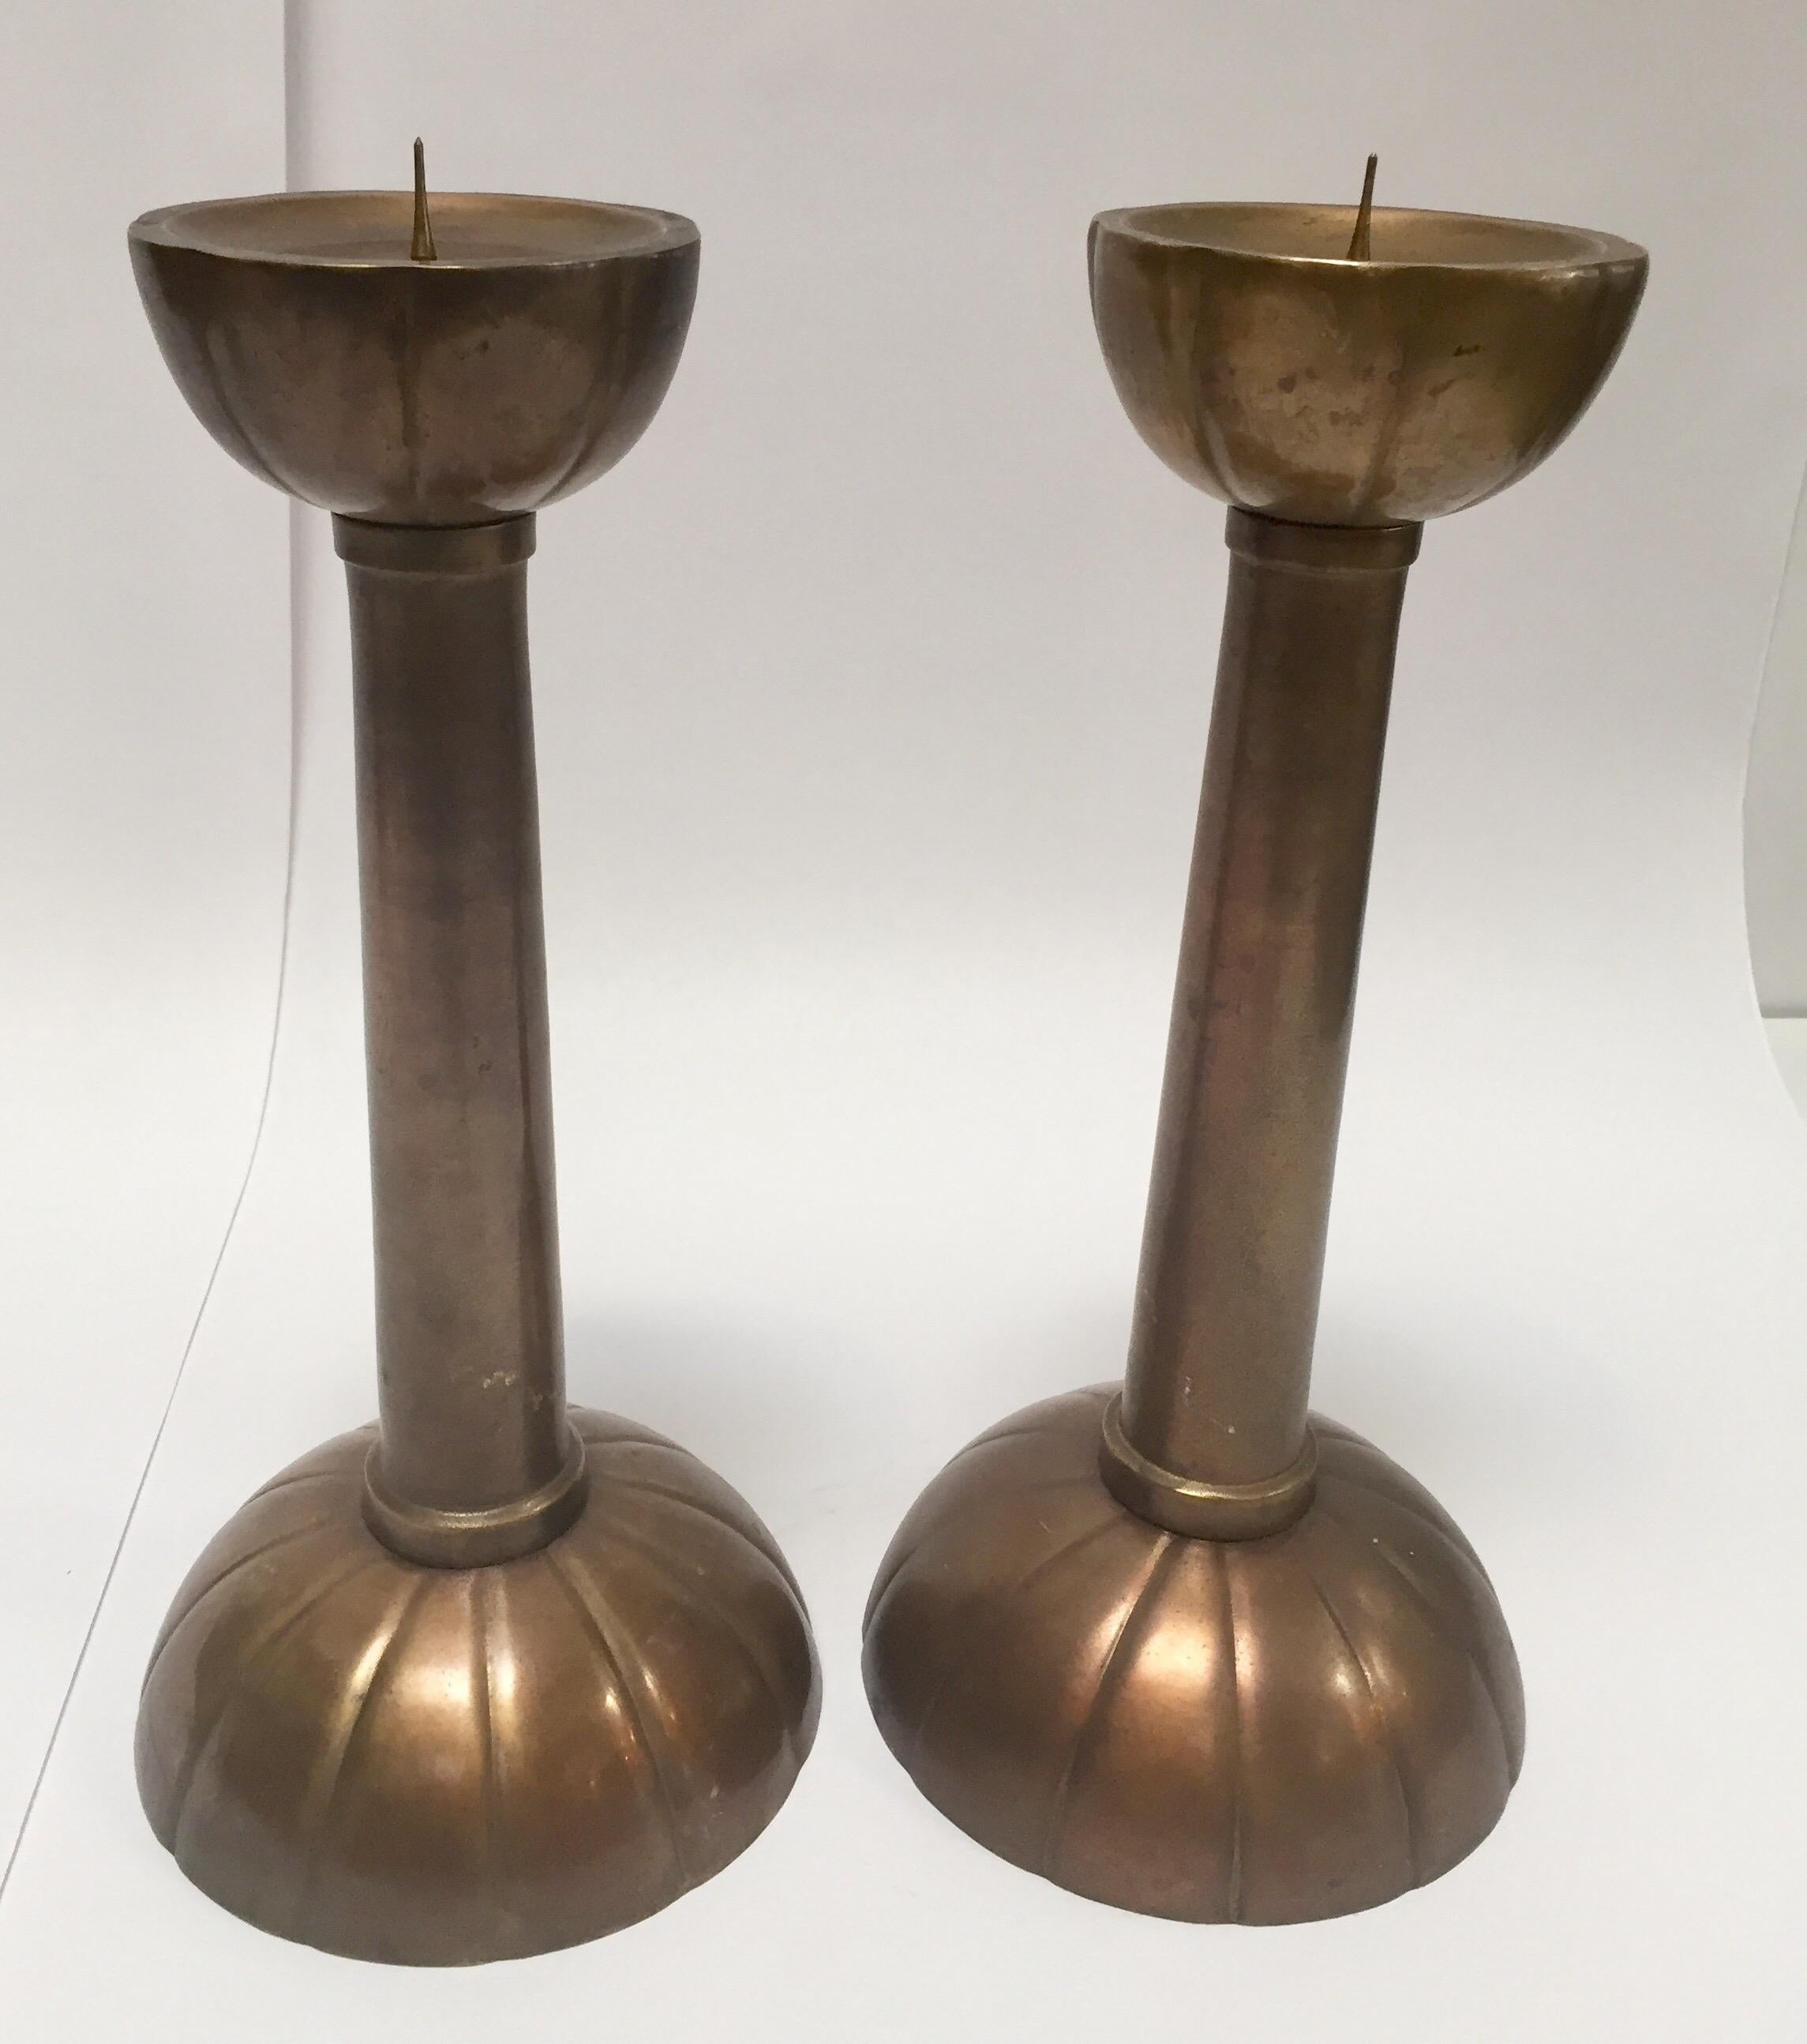 Fabulous pair of large brass candlesticks on a round scalloped base.
Tall form with scalloped base and upper part underneath of the candle prong.
They are a true beauty and will fit any environment.
Cast iron brass, rose color, nice patina.
Mid 20th